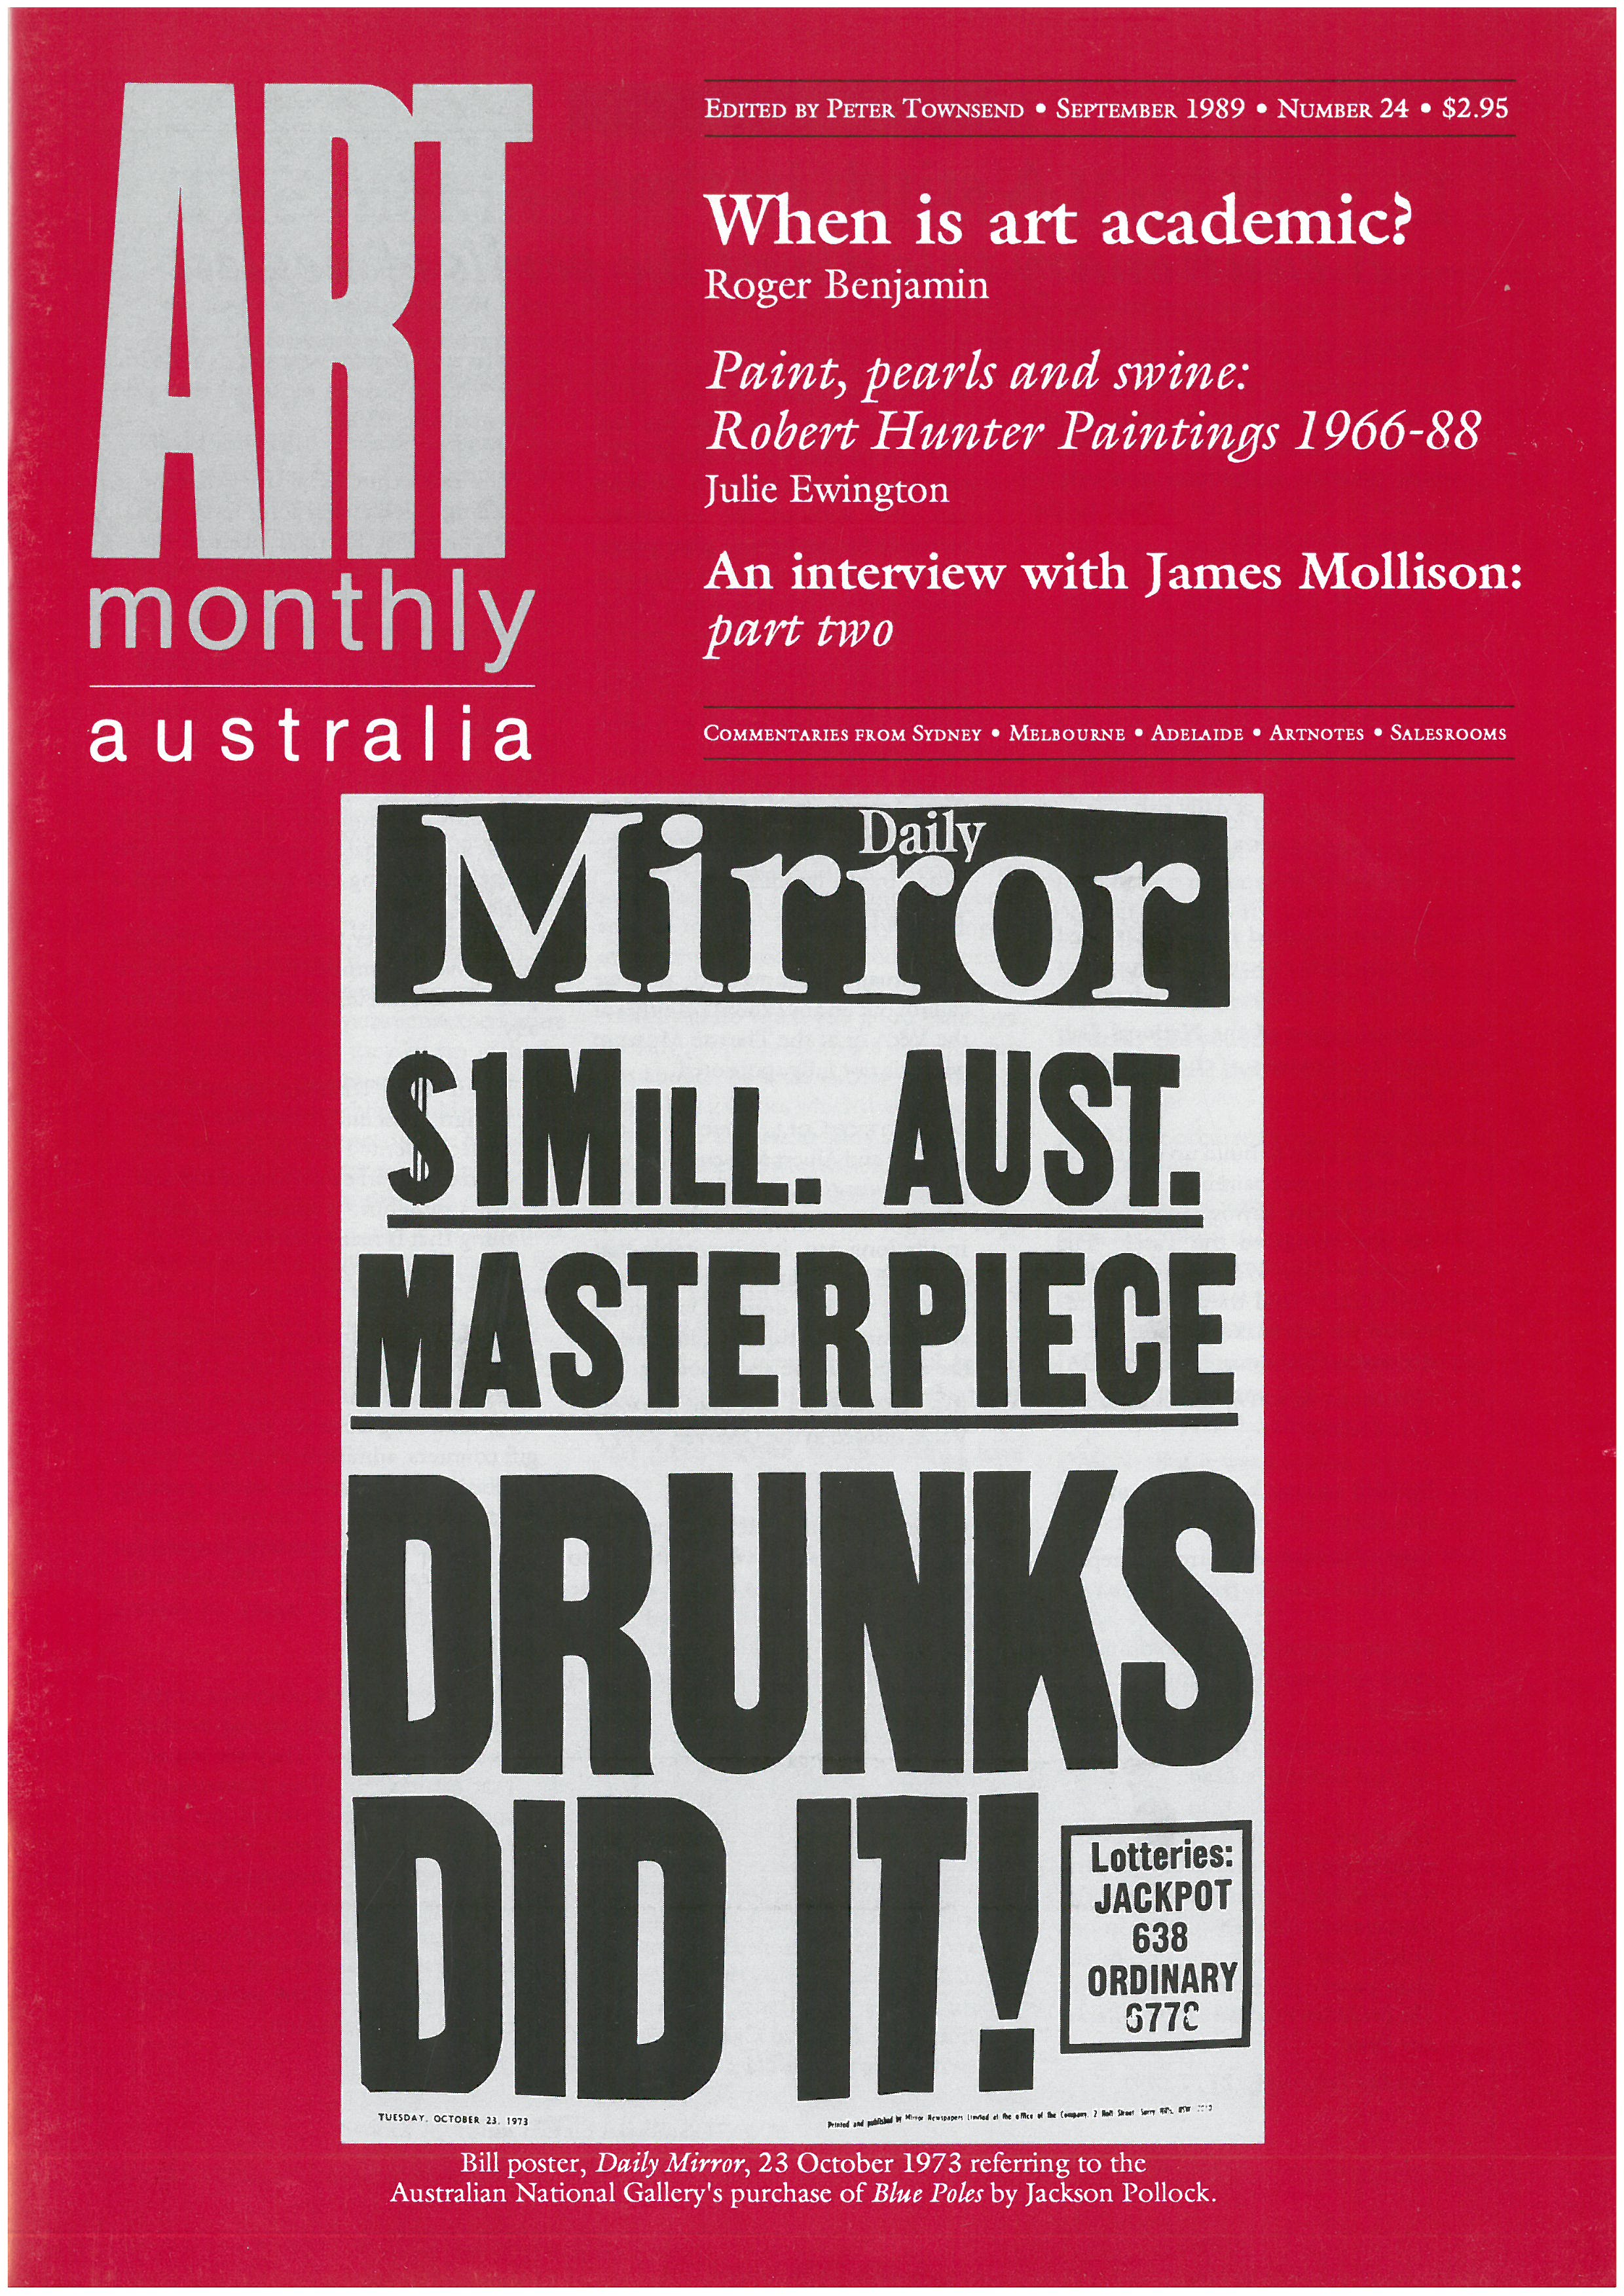 Issue 24 Sept 1989